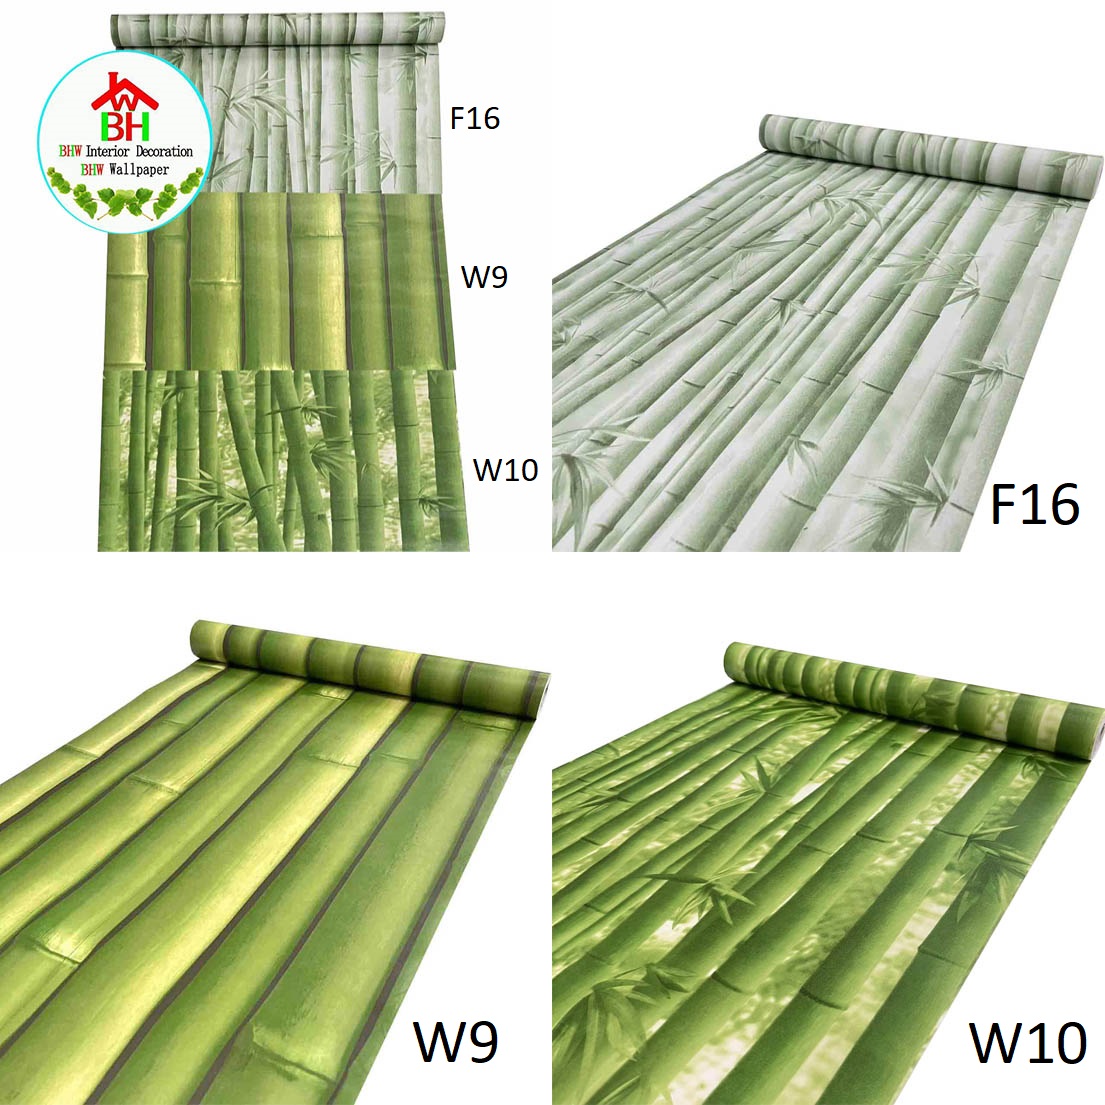 BHW Wallpaper Bamboo Design Color Green Self Adhesive Wall Paper PVC  Waterproof F16 W9 W10 - BHW